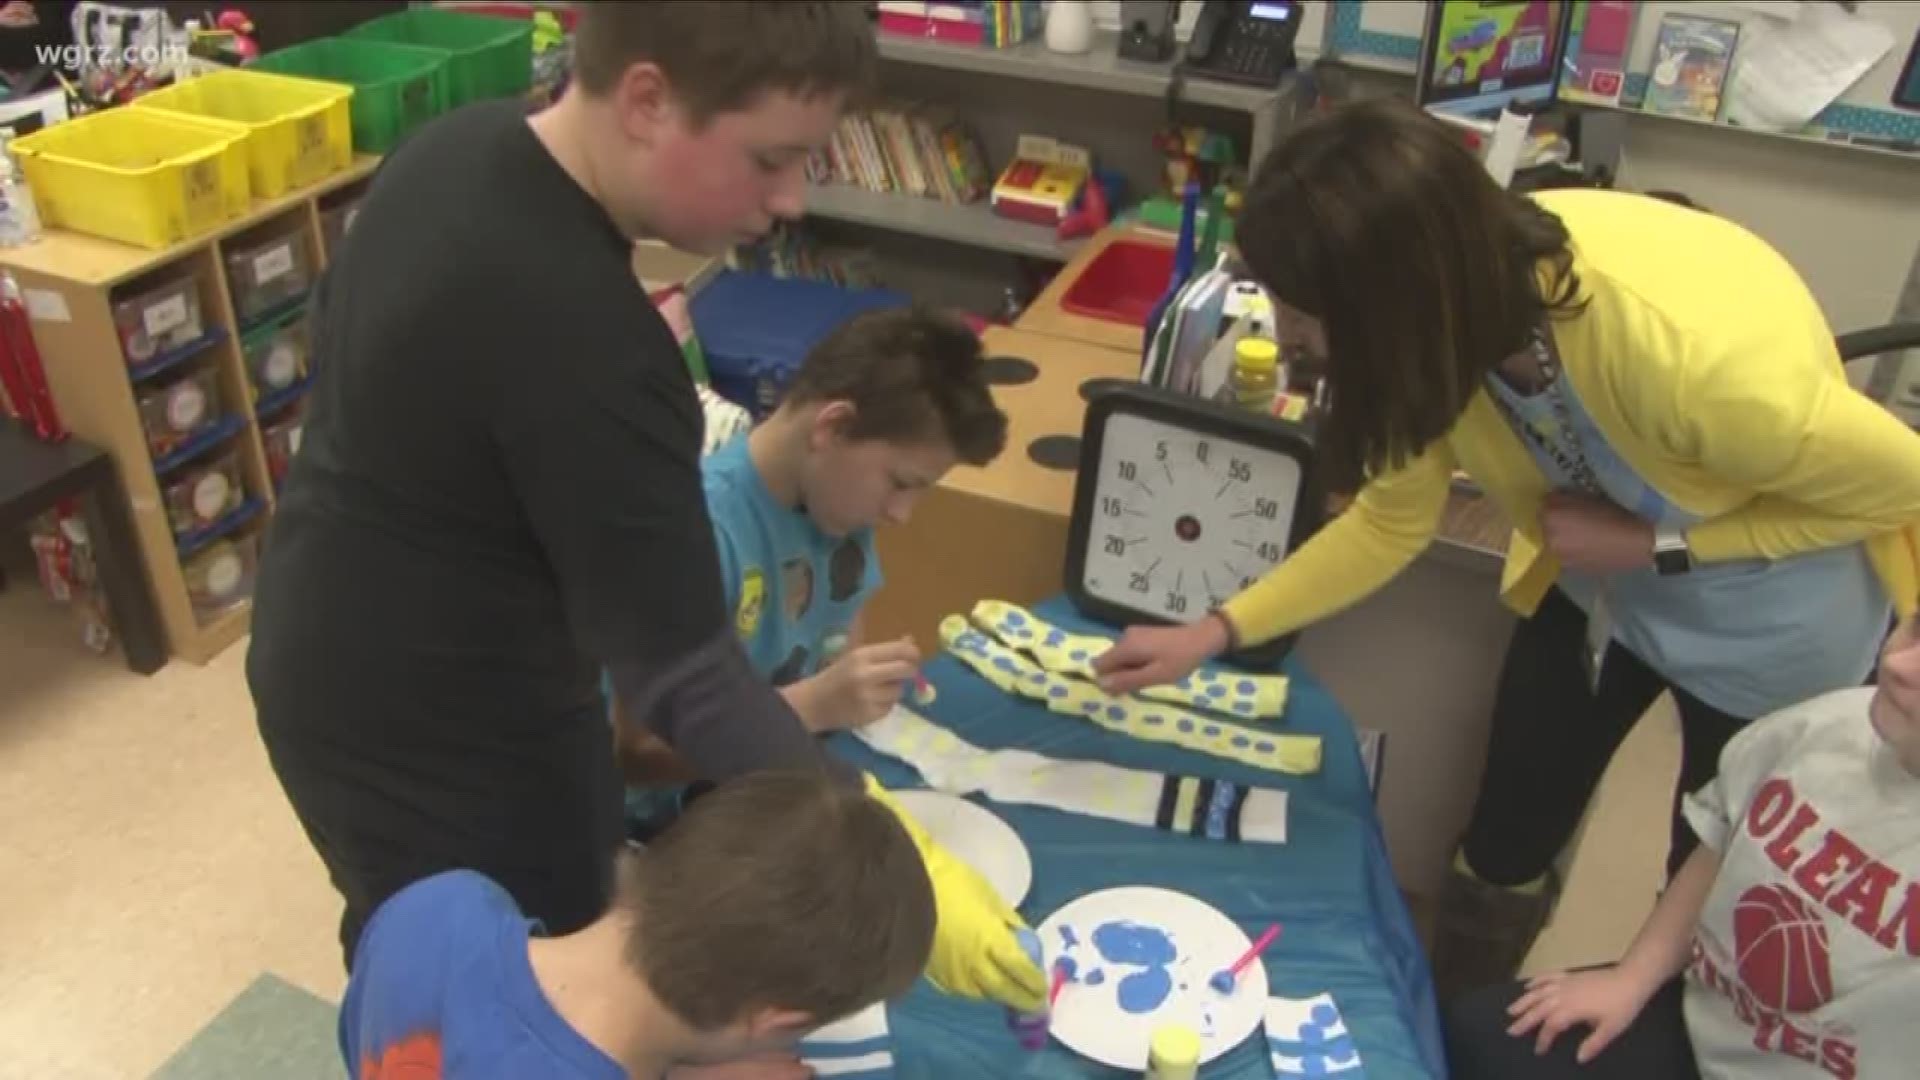 Making and selling tie-dye socks gives the special needs students a sense of pride and purpose.